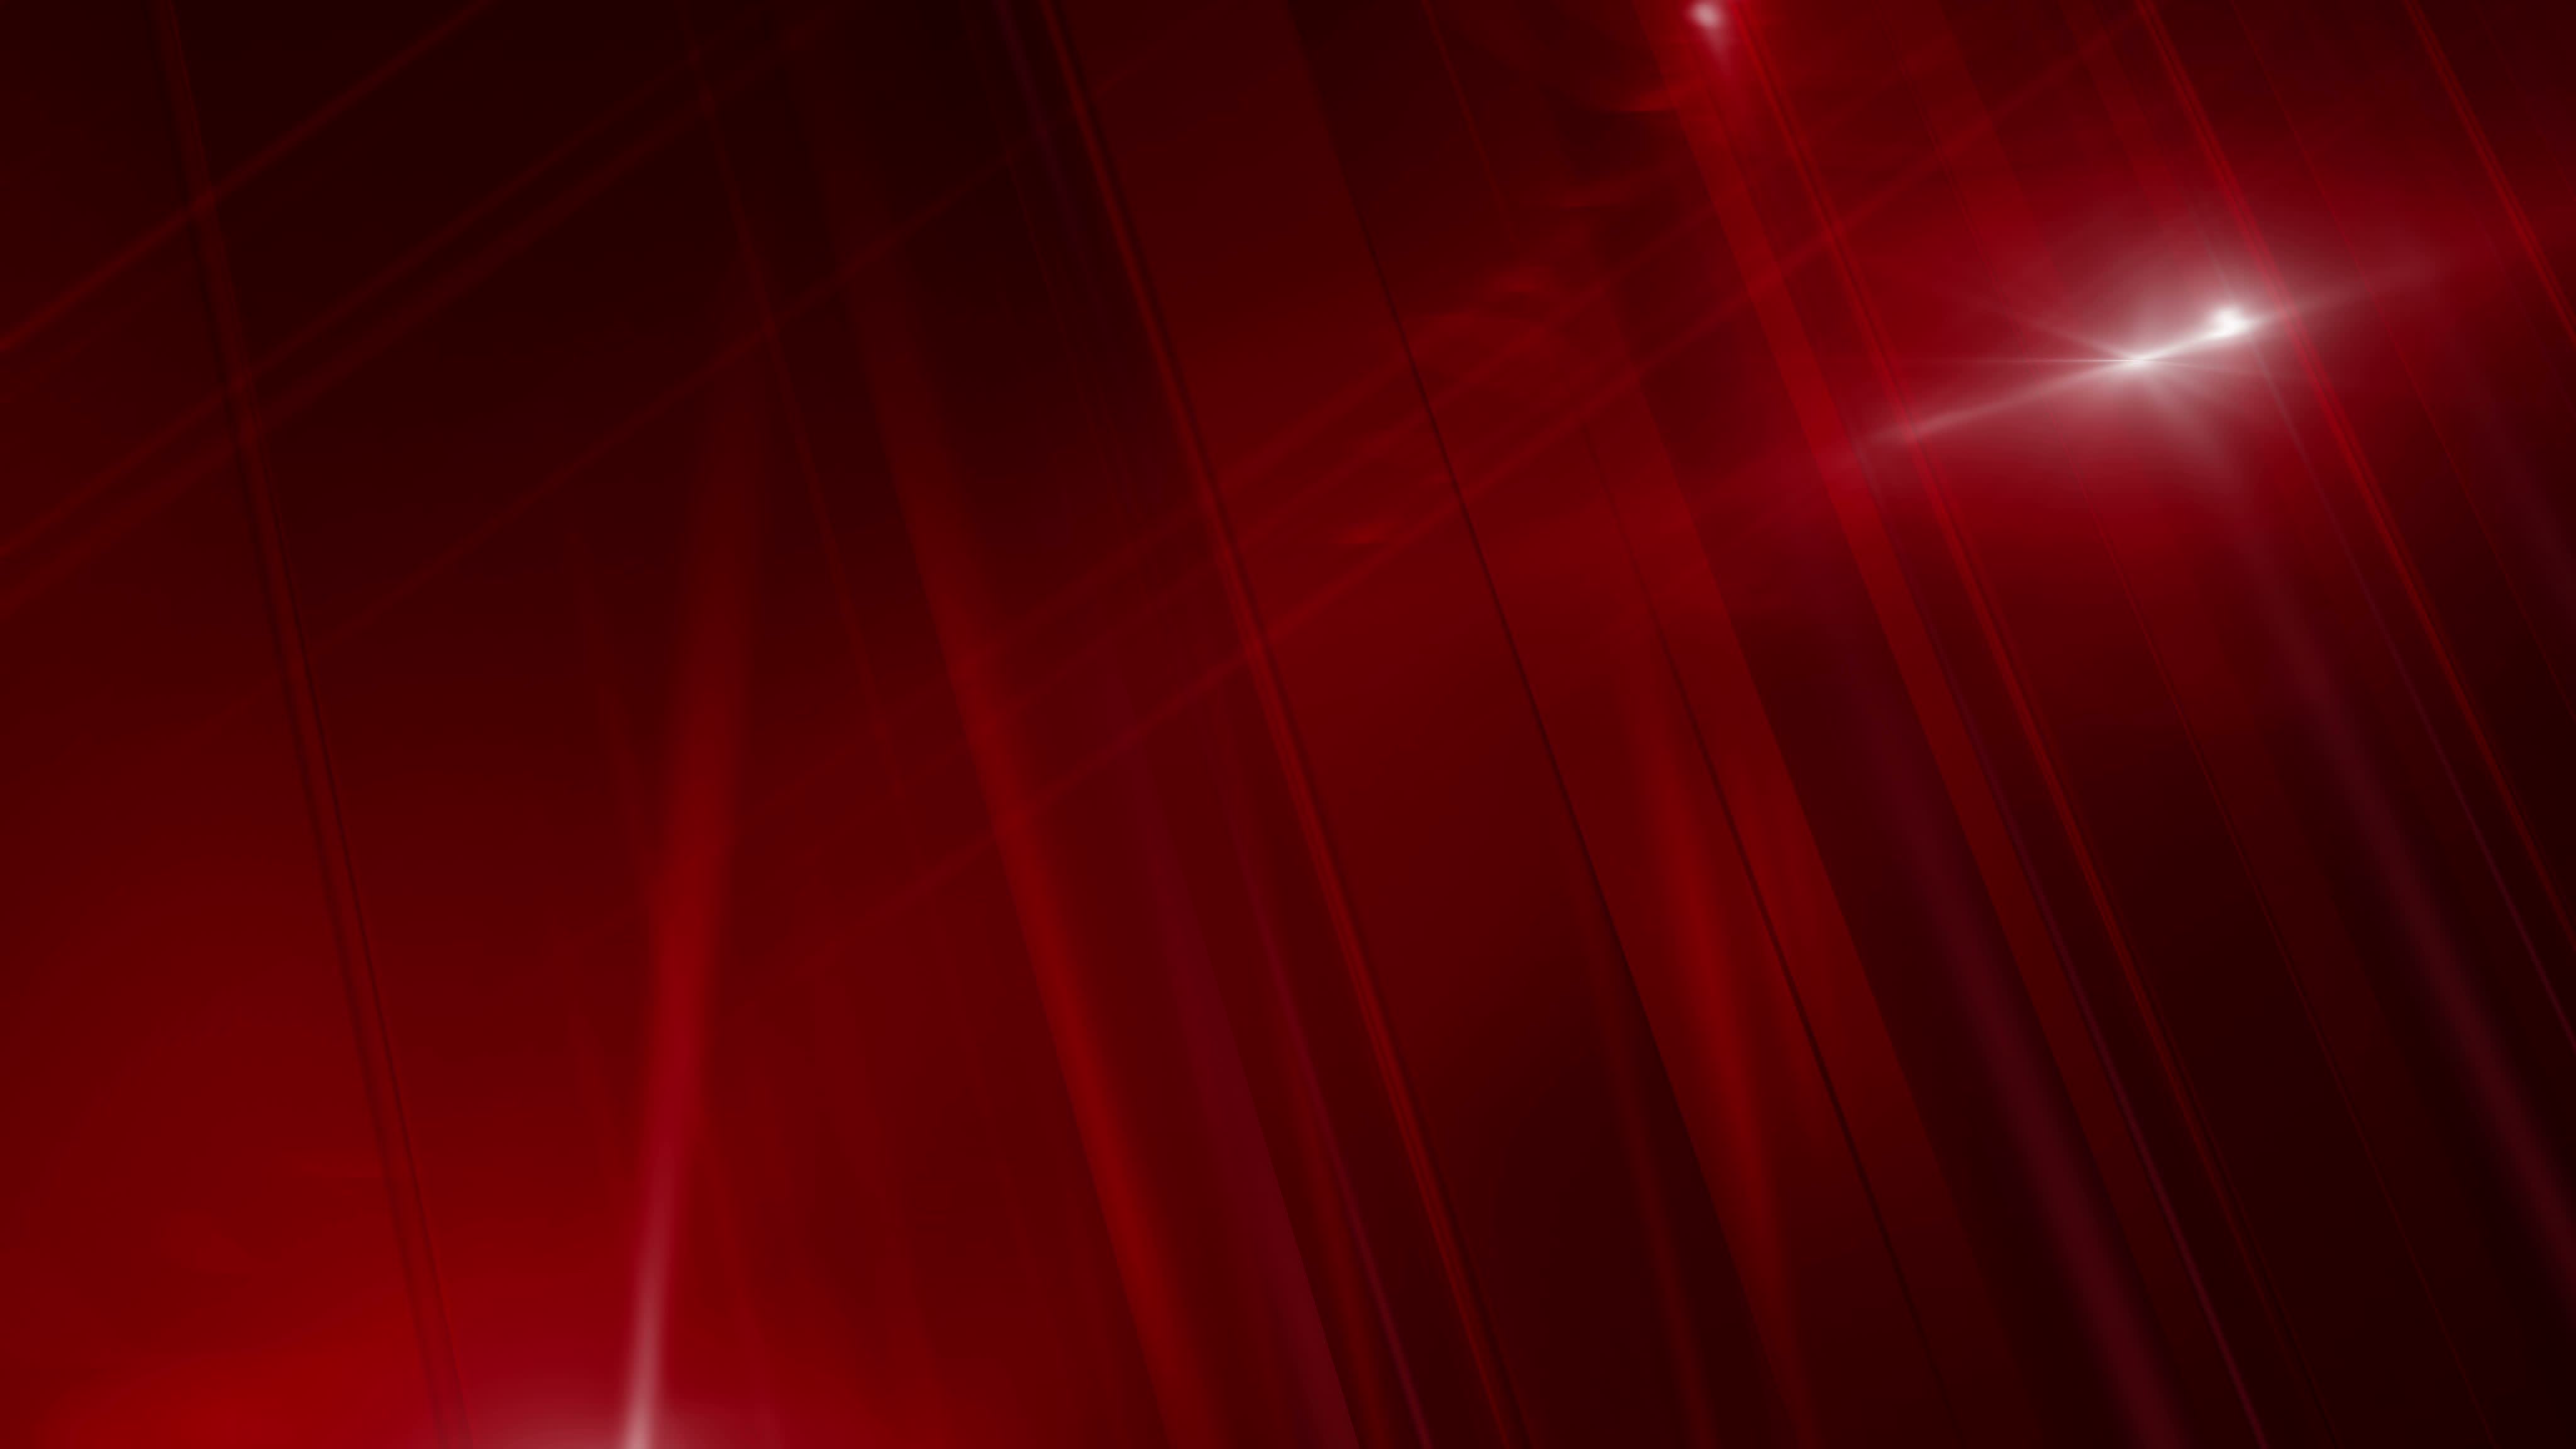 Abstract Background Red HD Cool 7 HD Wallpapercom